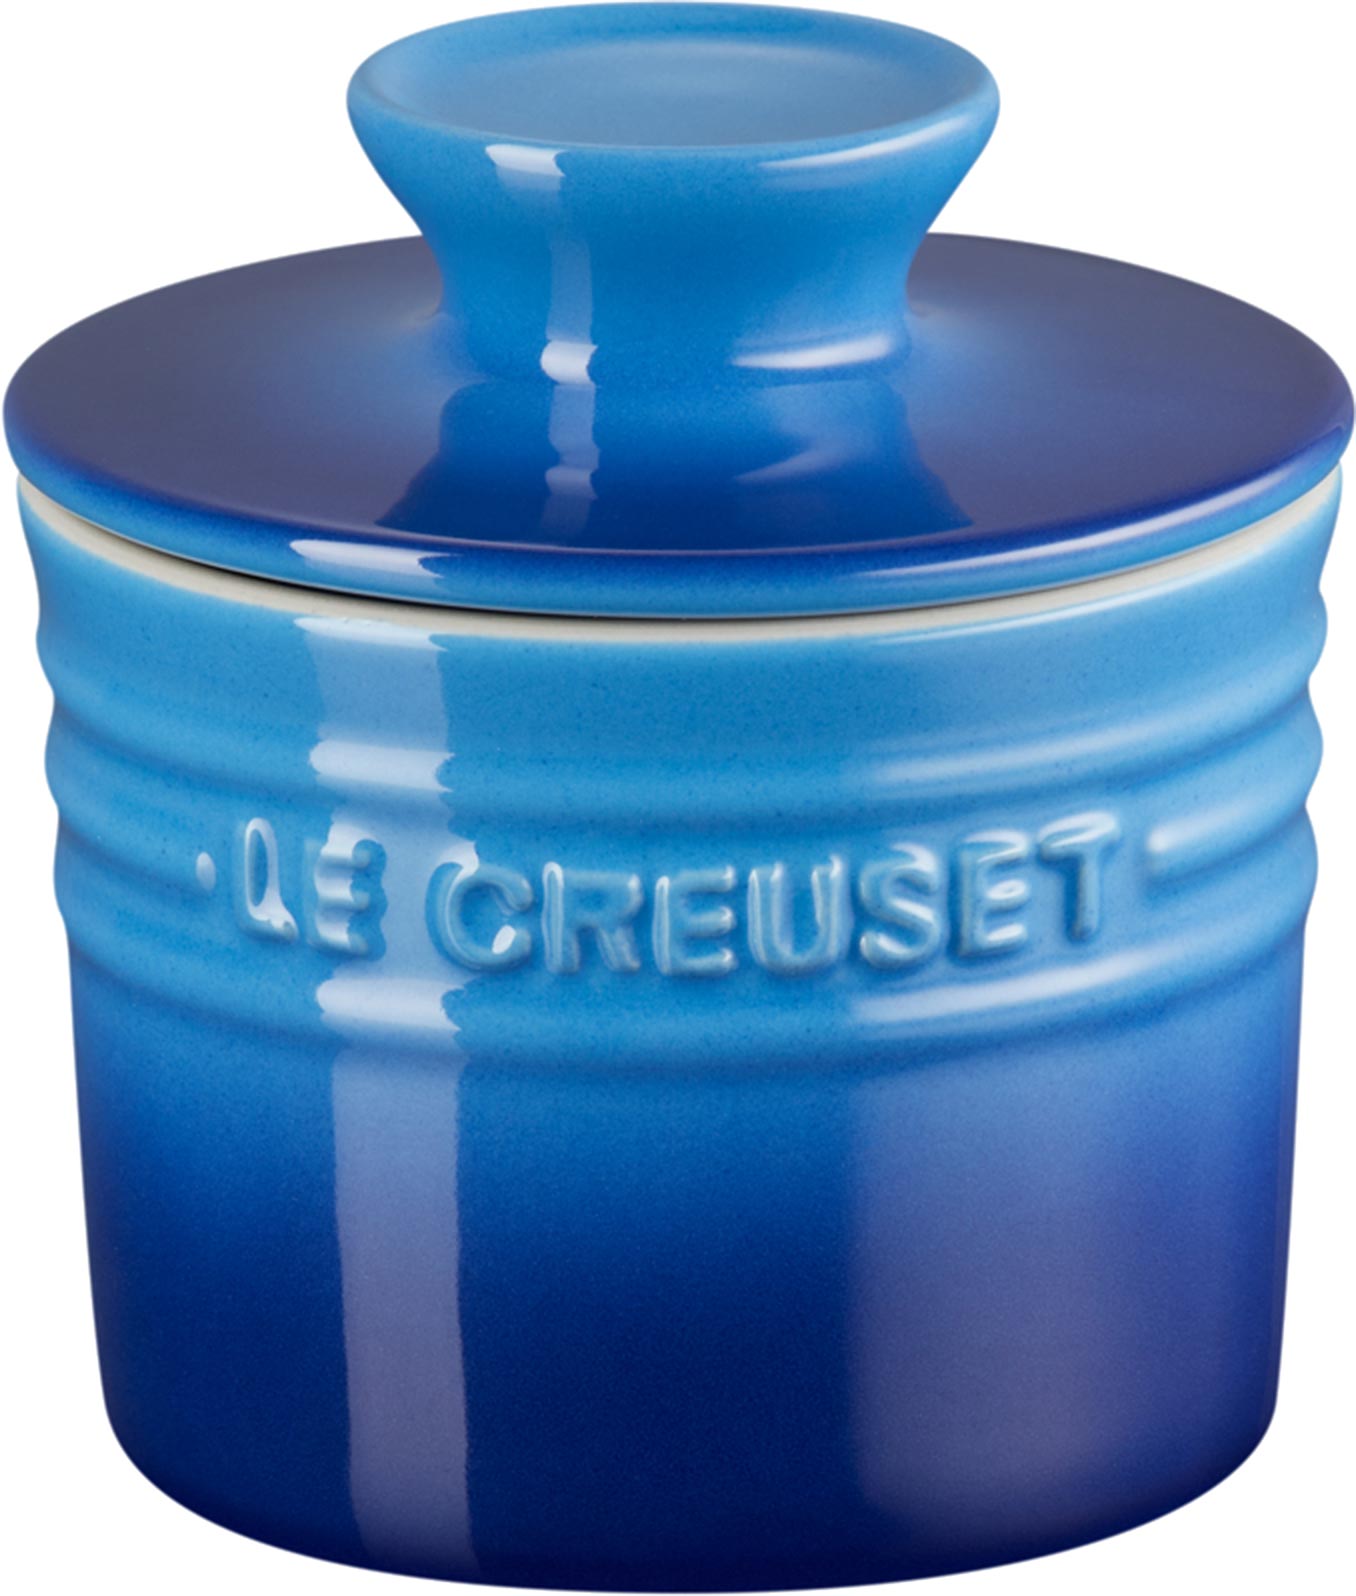 Le Creuset Stoneware Butter Bell